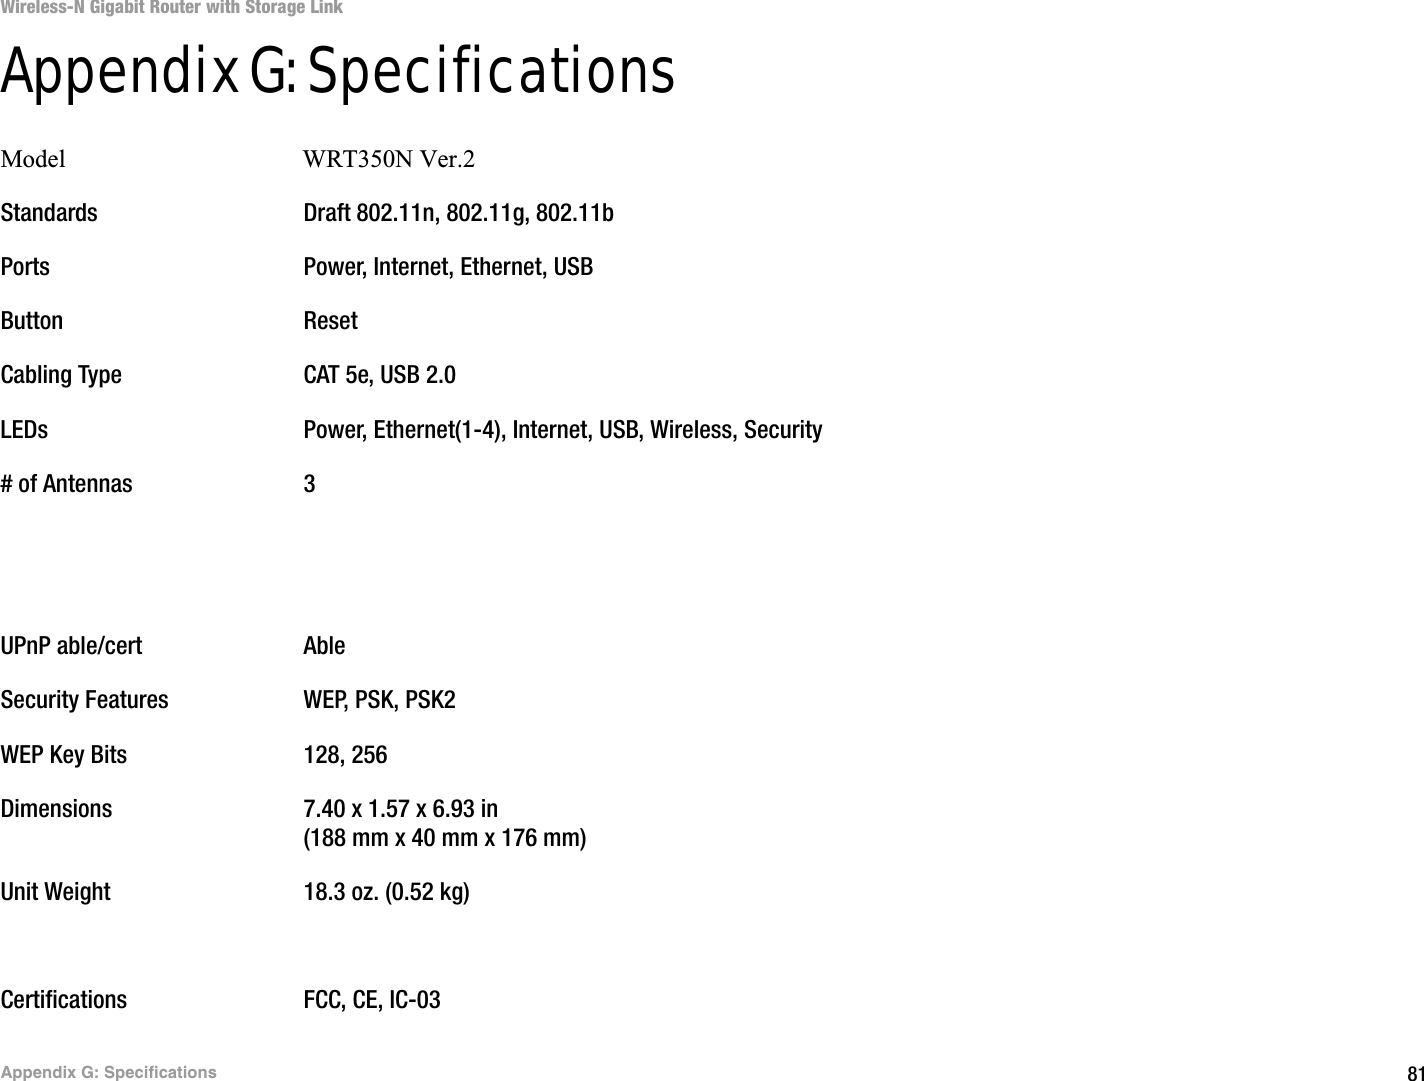 81Appendix G: SpecificationsWireless-N Gigabit Router with Storage LinkAppendix G: SpecificationsModel                                      WRT350N Ver.2Standards Draft 802.11n, 802.11g, 802.11bPorts Power, Internet, Ethernet, USBButton ResetCabling Type CAT 5e, USB 2.0LEDs Power, Ethernet(1-4), Internet, USB, Wireless, Security# of Antennas 3UPnP able/cert AbleSecurity Features WEP, PSK, PSK2WEP Key Bits 128, 256Dimensions 7.40 x 1.57 x 6.93 in(188 mm x 40 mm x 176 mm)Unit Weight 18.3 oz. (0.52 kg)Certifications FCC, CE, IC-03